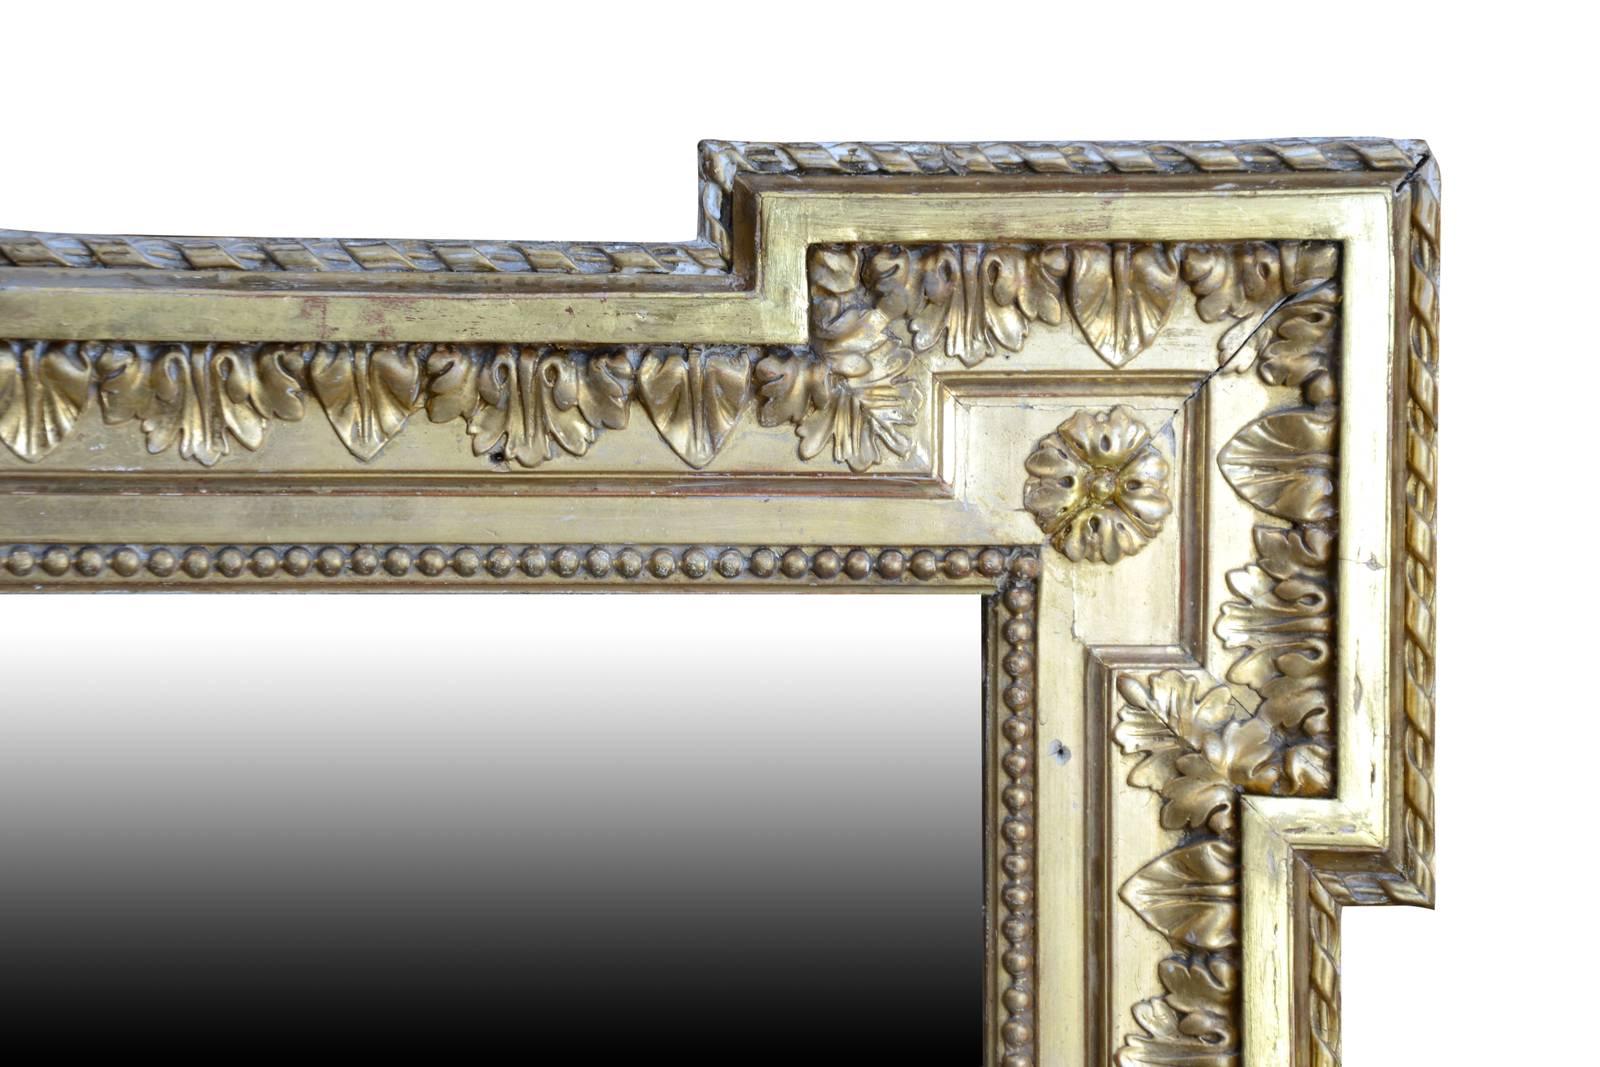 Dated from the 19th century, a Louis XVI style gilded wood mirror. Bordered by a double beaded frieze and interlacing, it is topped with a crown of flowers and laurel branches. The two upper corners are animated by rosettes.